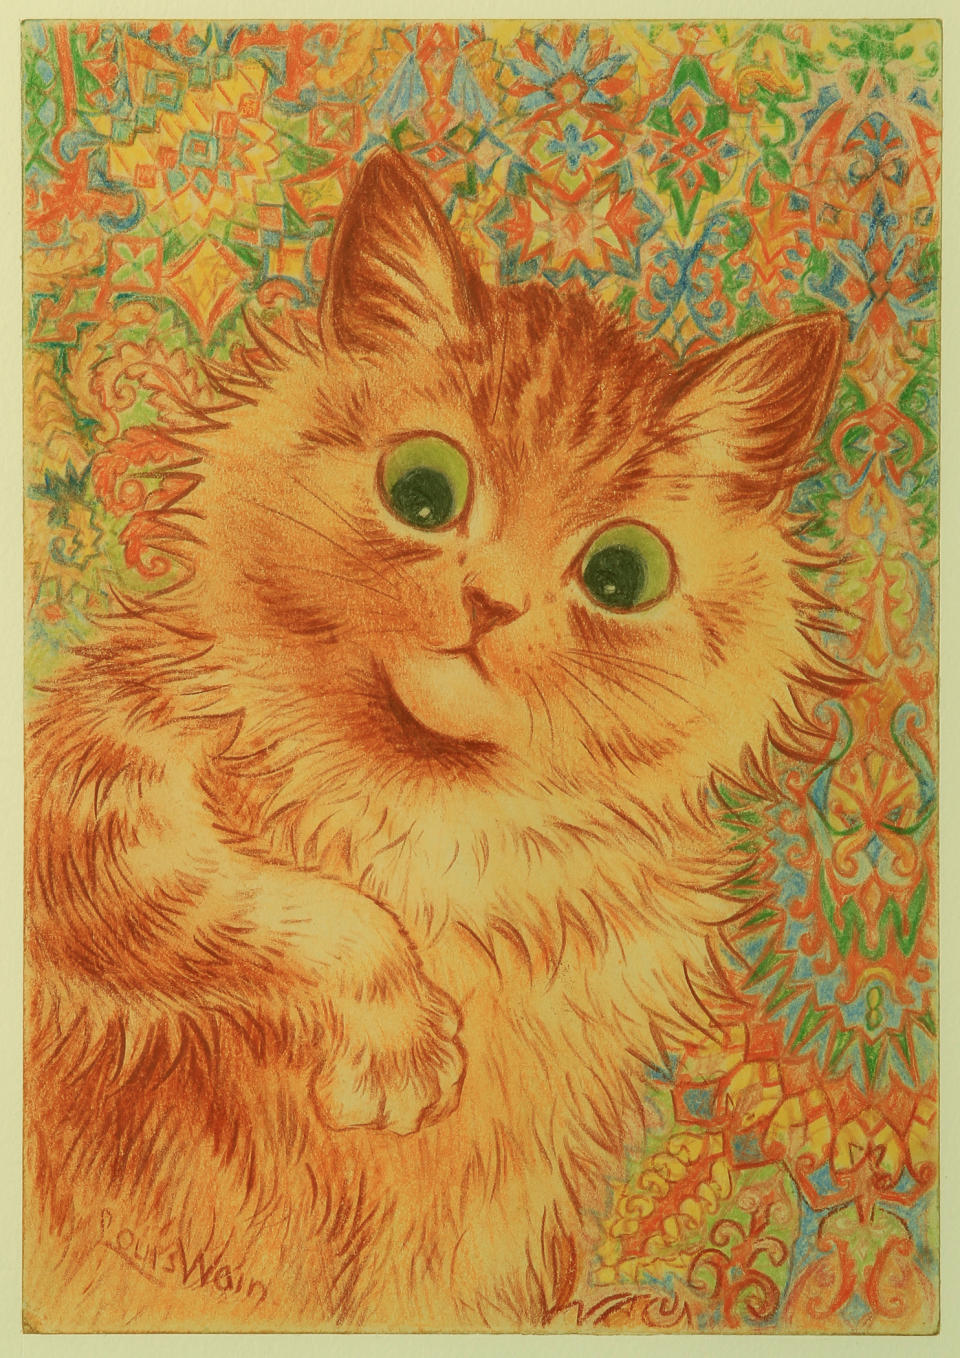 A painting by Louis Wain (Bethlem Museum of the Mind/PA)